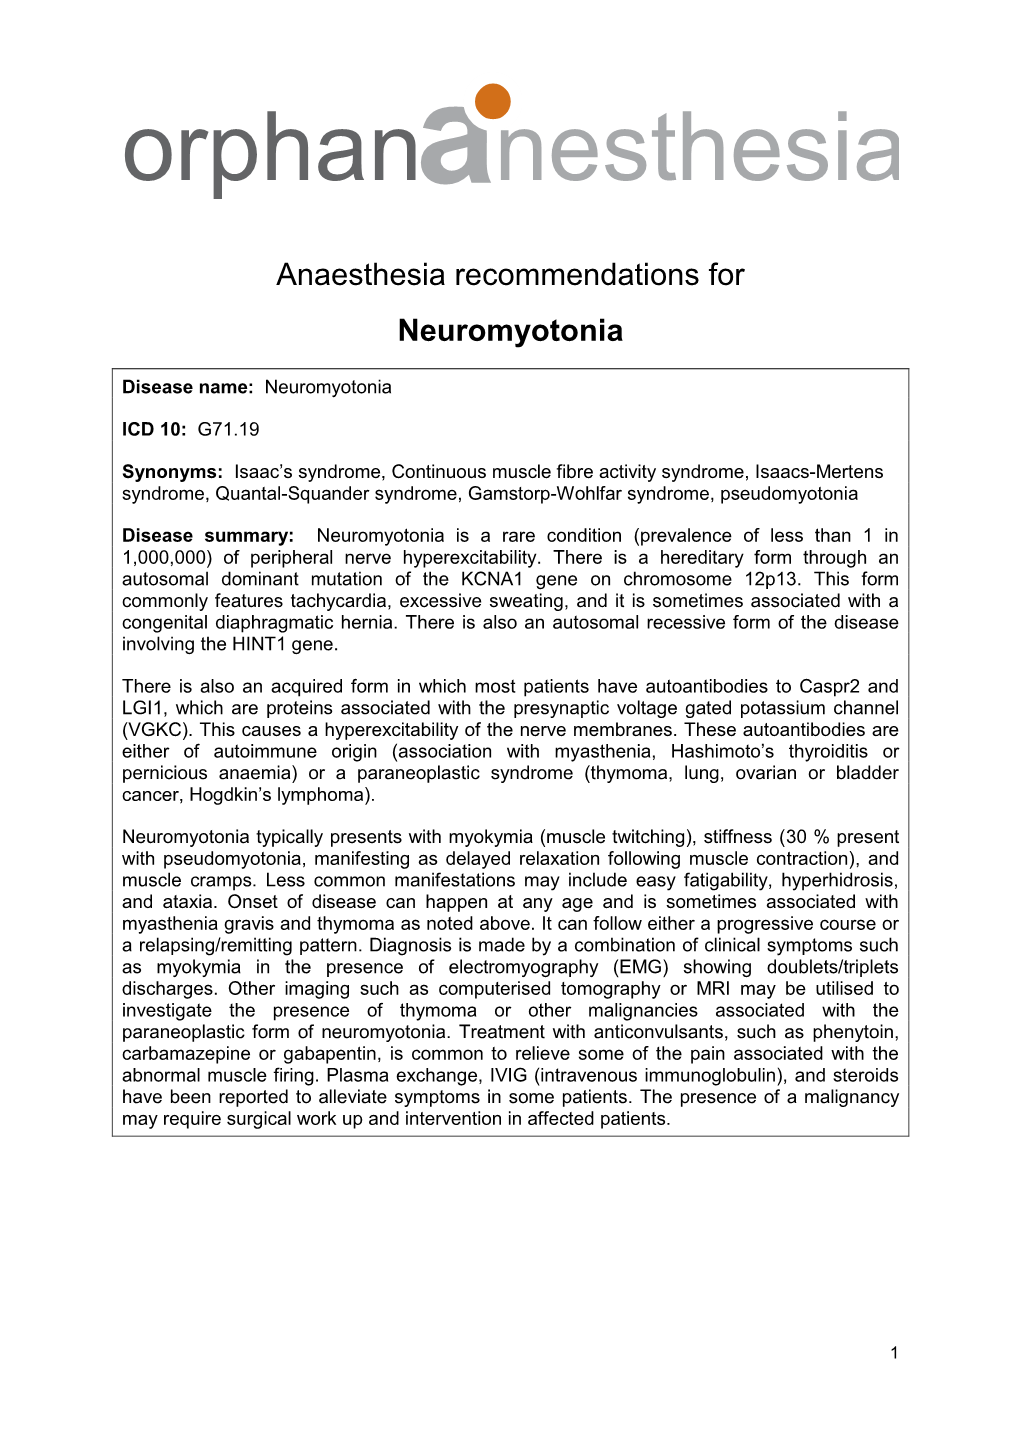 Anaesthesia Recommendations for Neuromyotonia